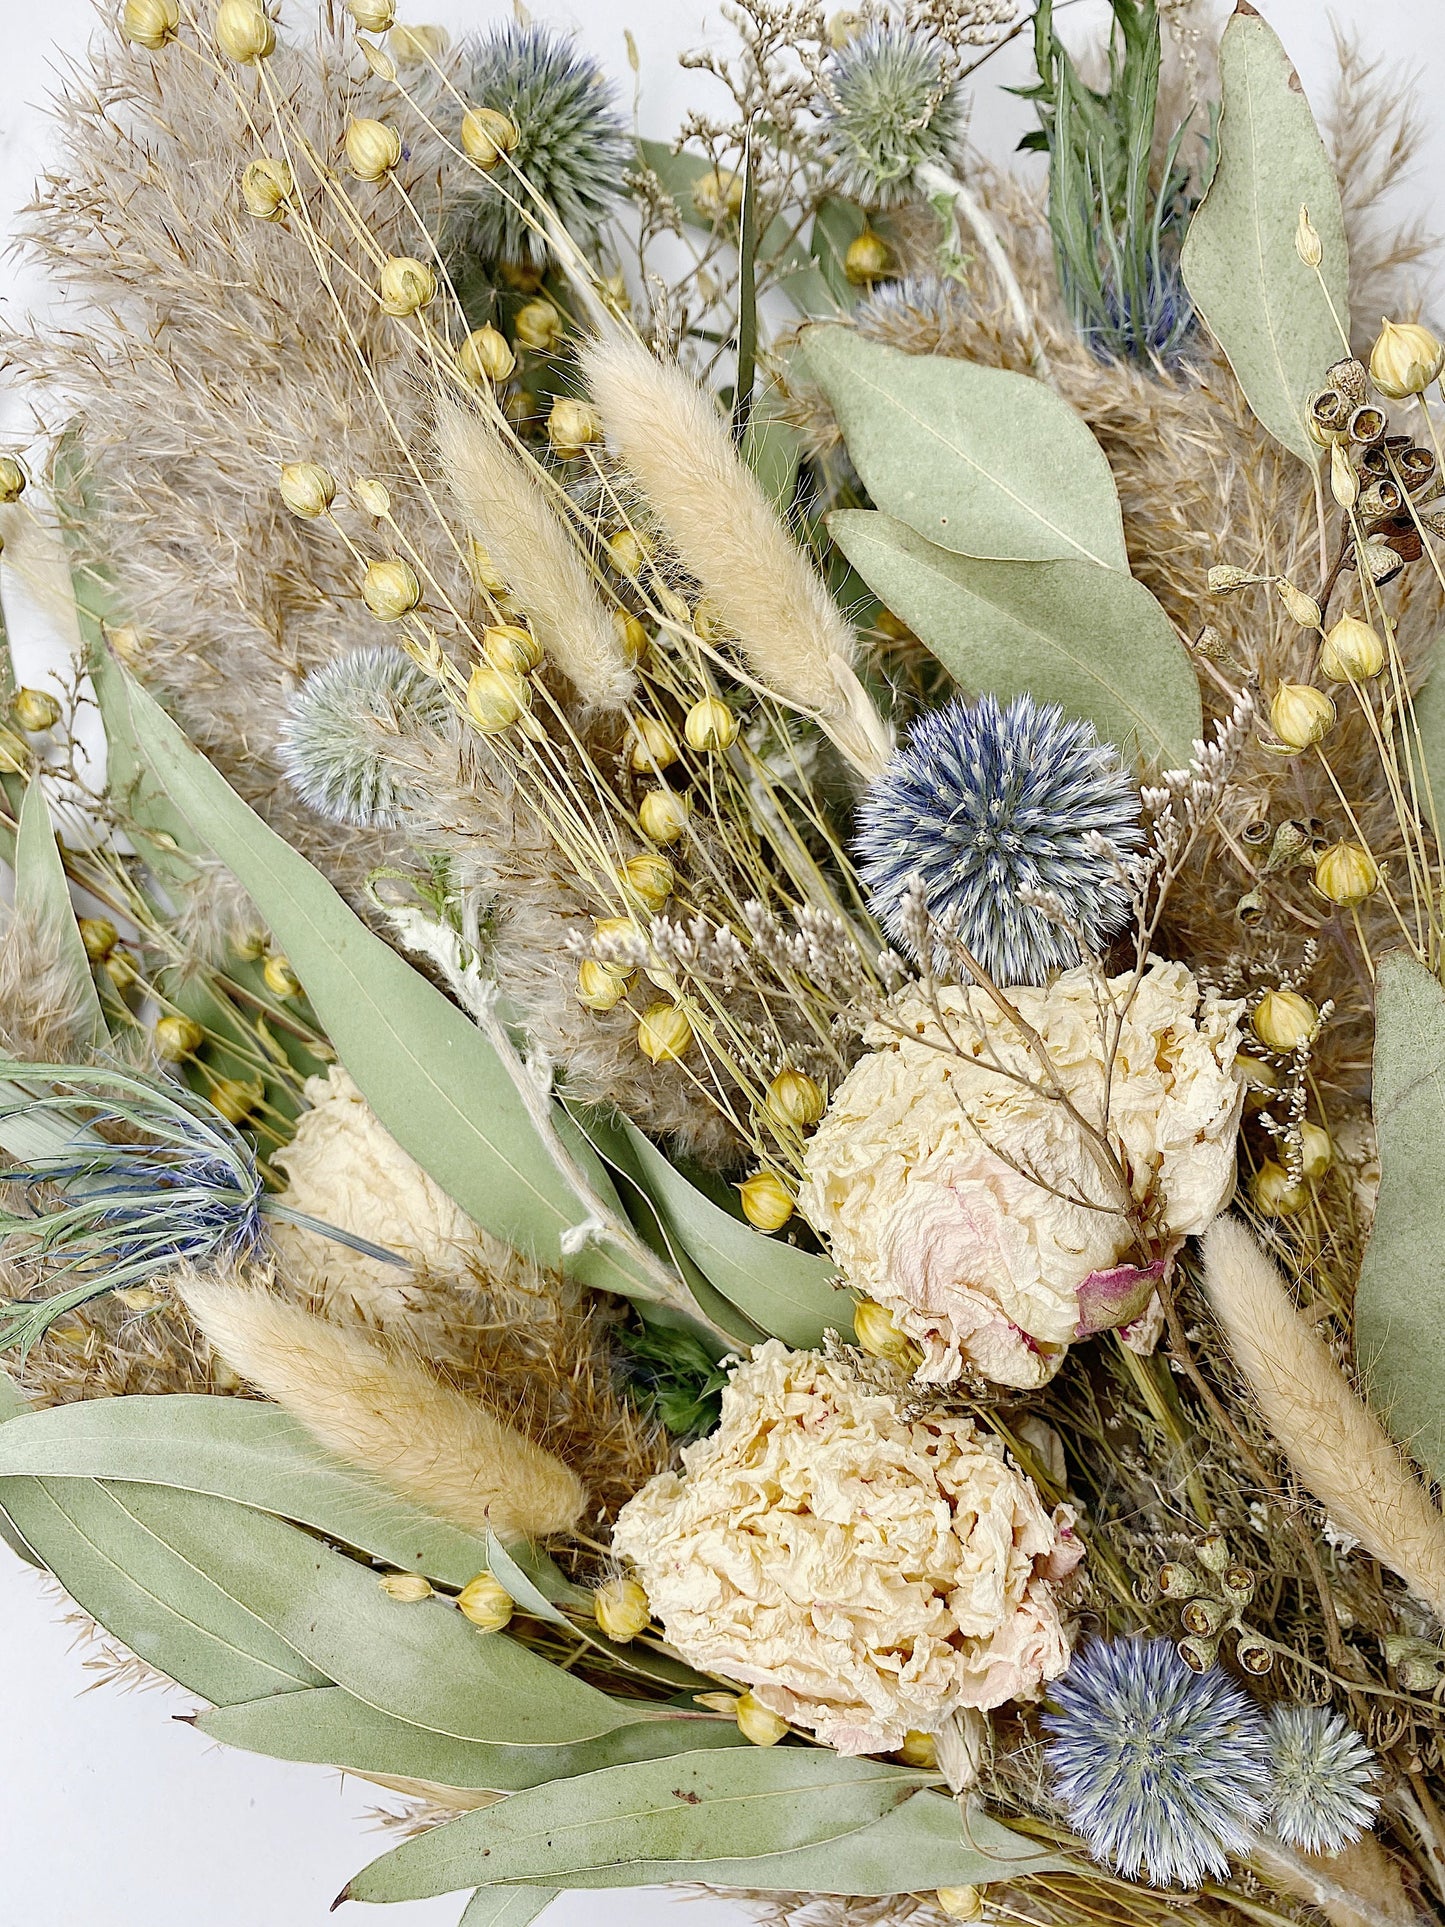 Wedding Bouquet, Pampas Grass, Dried Flowers, Summer, Bridal, Floral, Preserved Flowers, Peonies, Fairy, Blue, Natural, Flax, Greenery